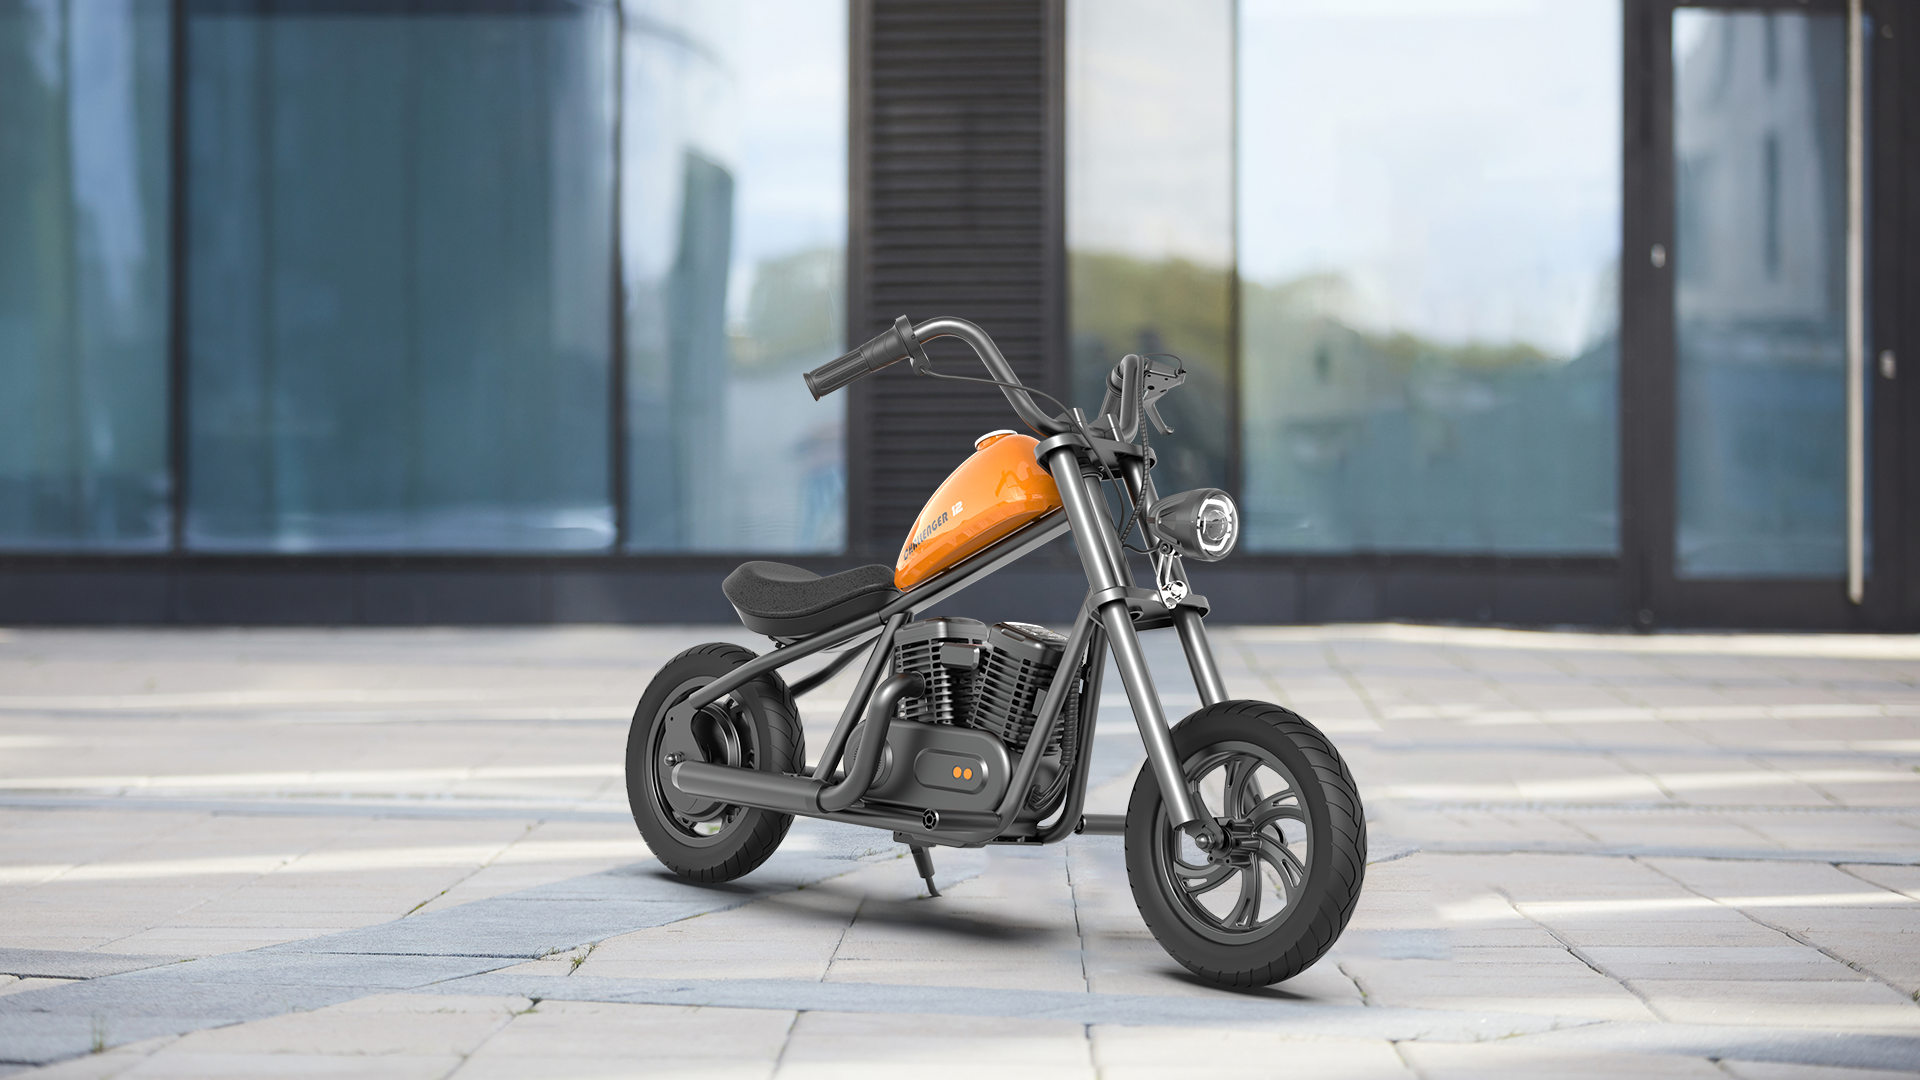 Why You Should Choose HYPER GOGO for Your Child's First Electric Motorcycle